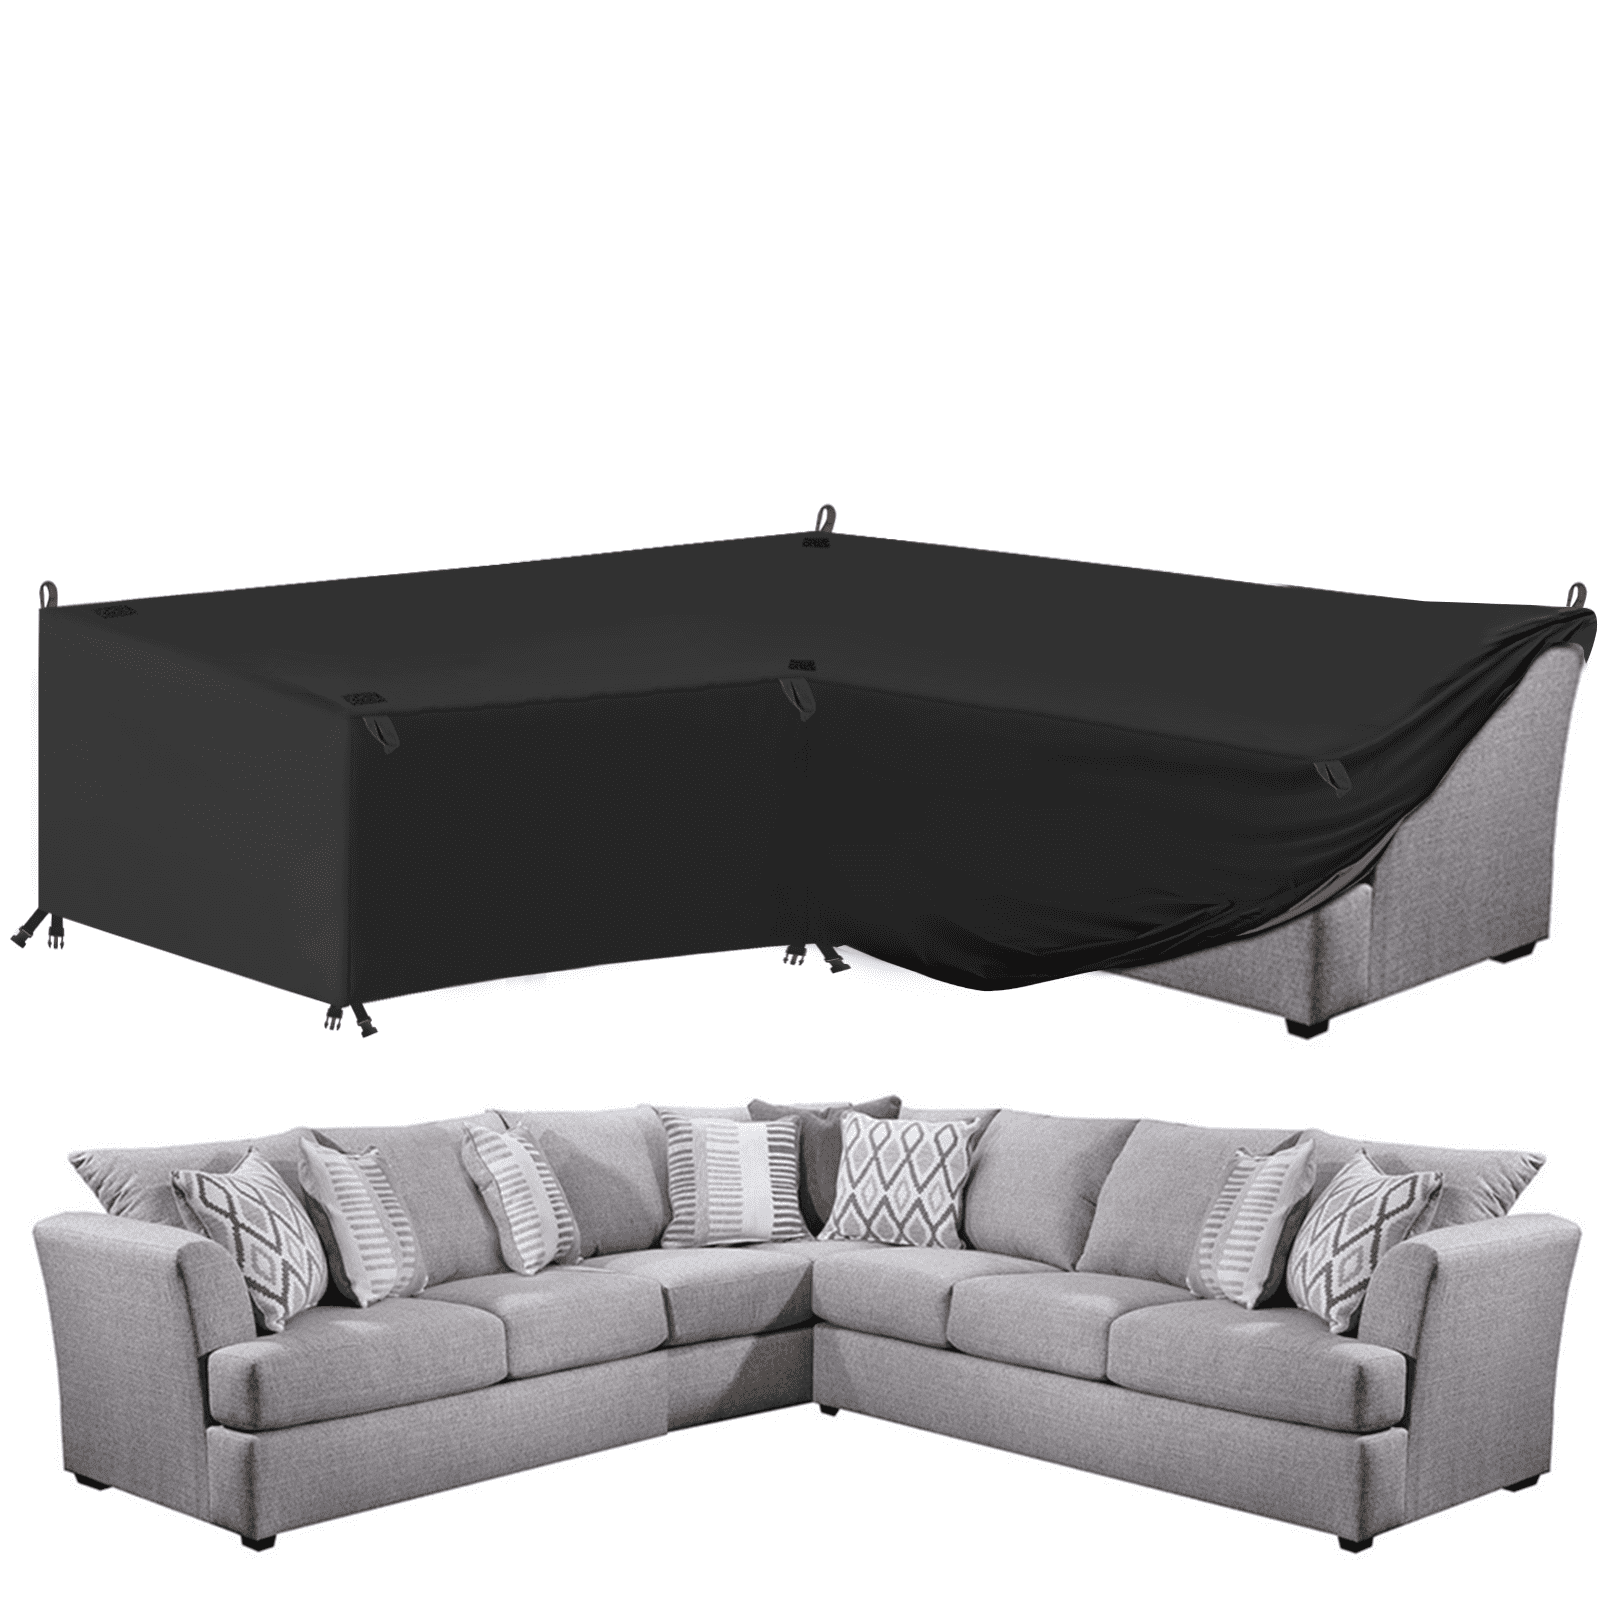 Rectangular 420D Heavy Duty Oxford Fabric Rattan Furniture Cover for Chair Sofa Outdoor 90x90x75cm Furniture Set Covers 35.4x35.4x29.5inch black